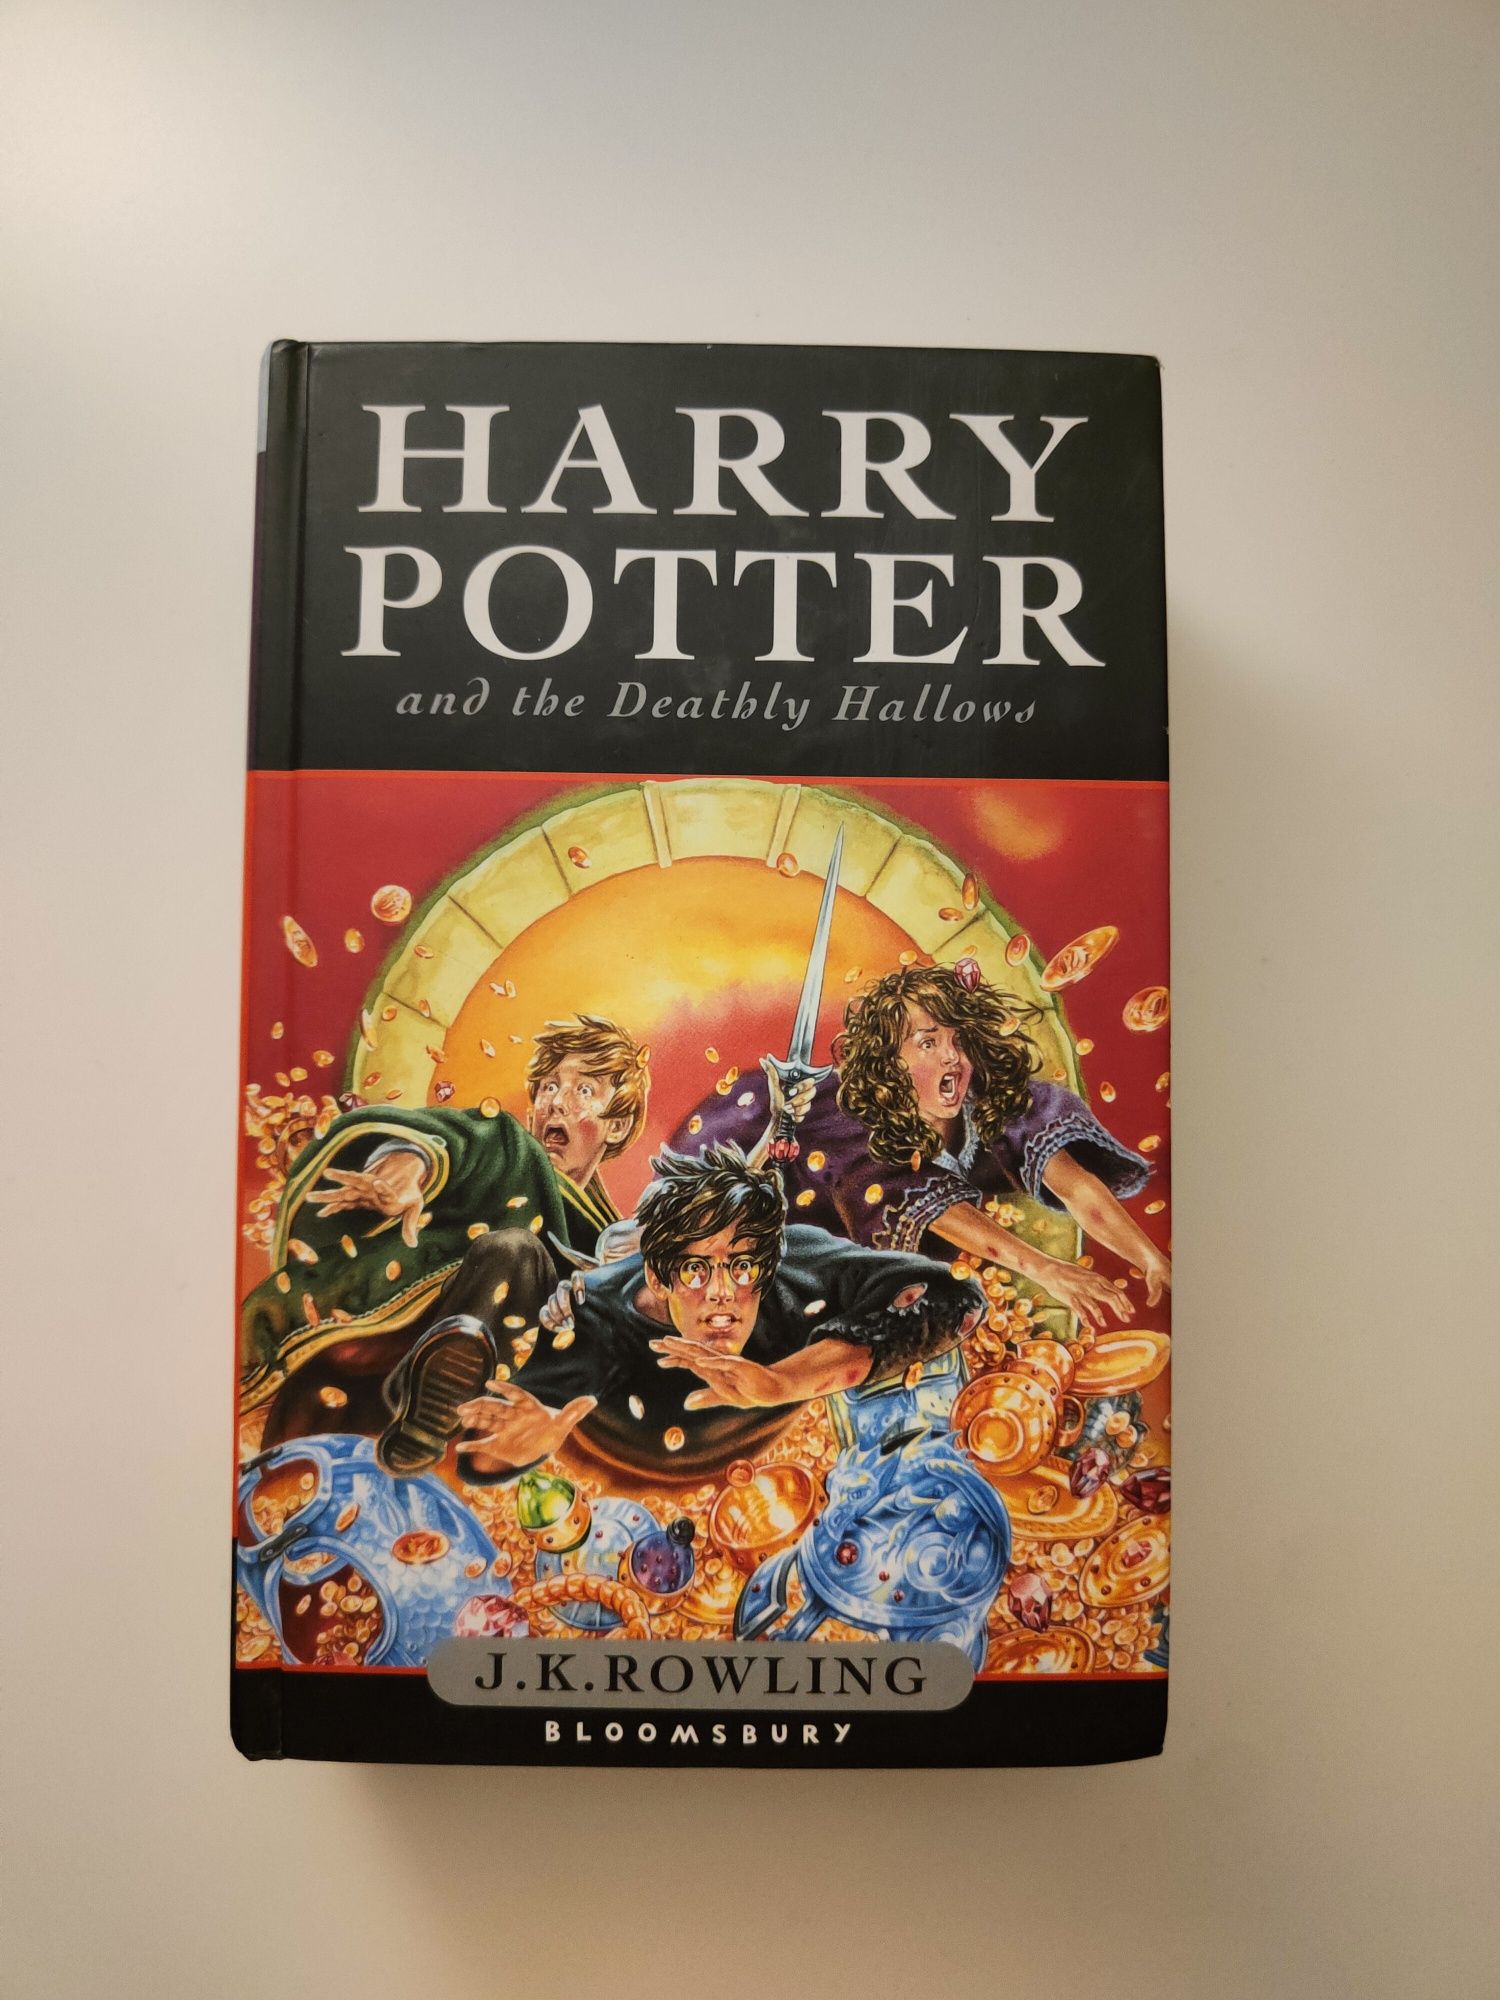 Harry Potter and the Deathly Hallows J.K.Rowling